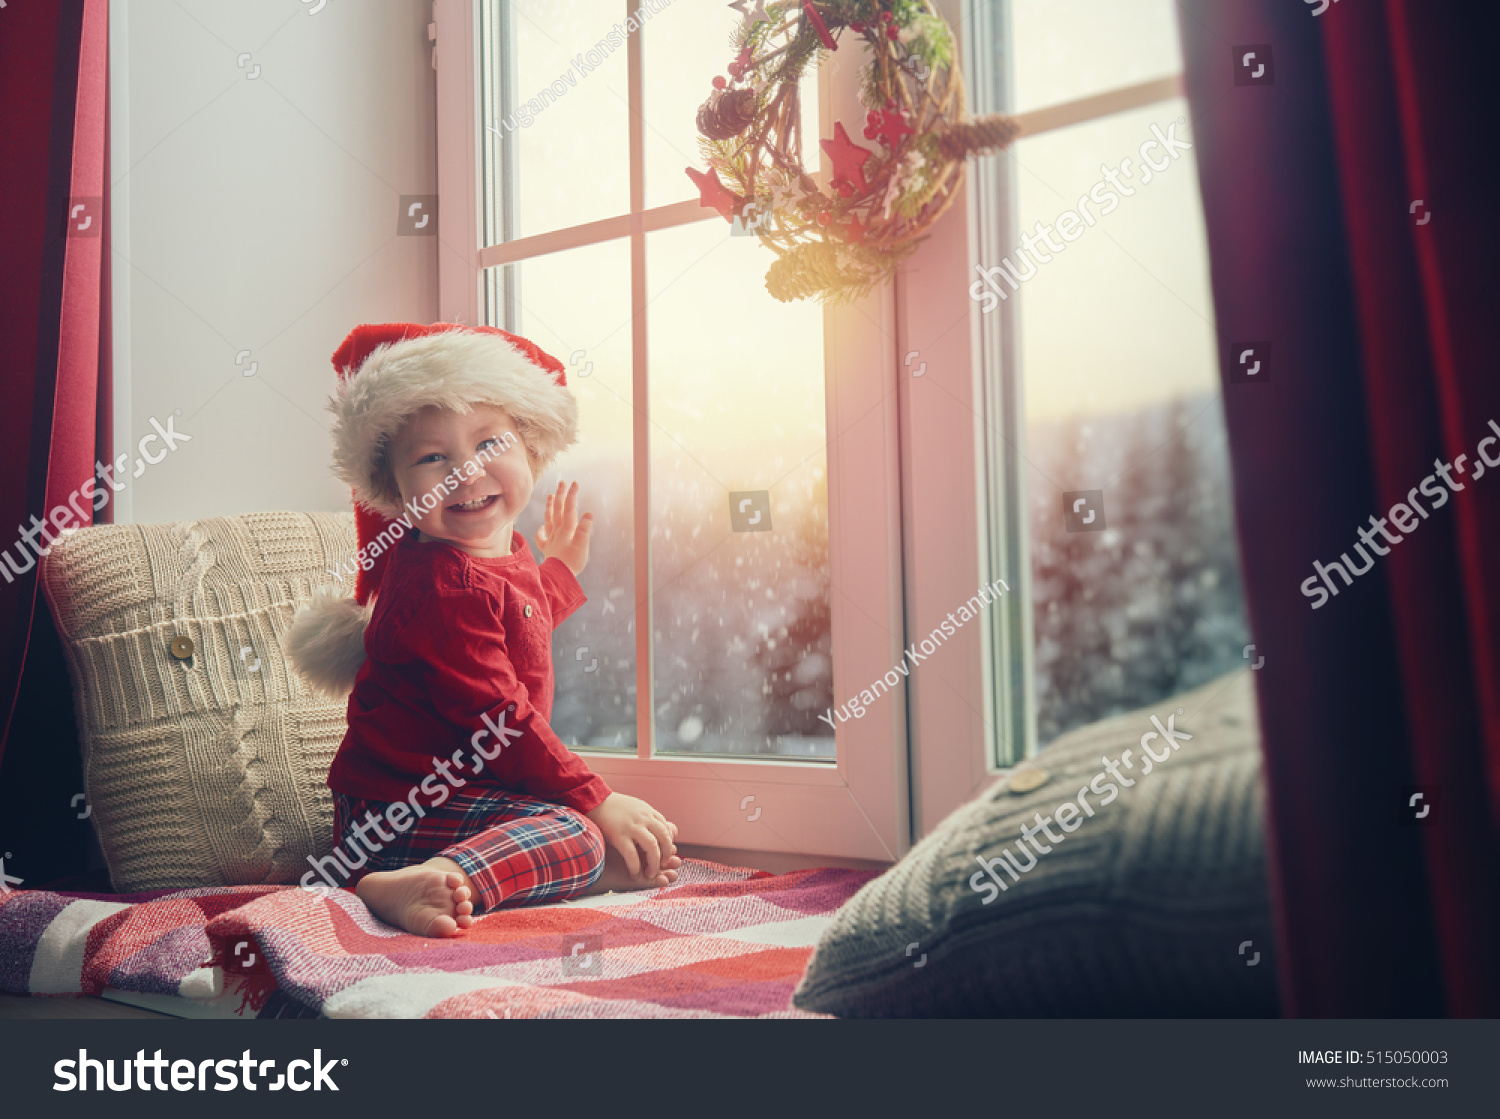 Merry Christmas and happy holidays! Cute little baby girl sitting by the window and looking at the winter forest. Room decorated on Christmas. Kid enjoys the snowfall. #515050003